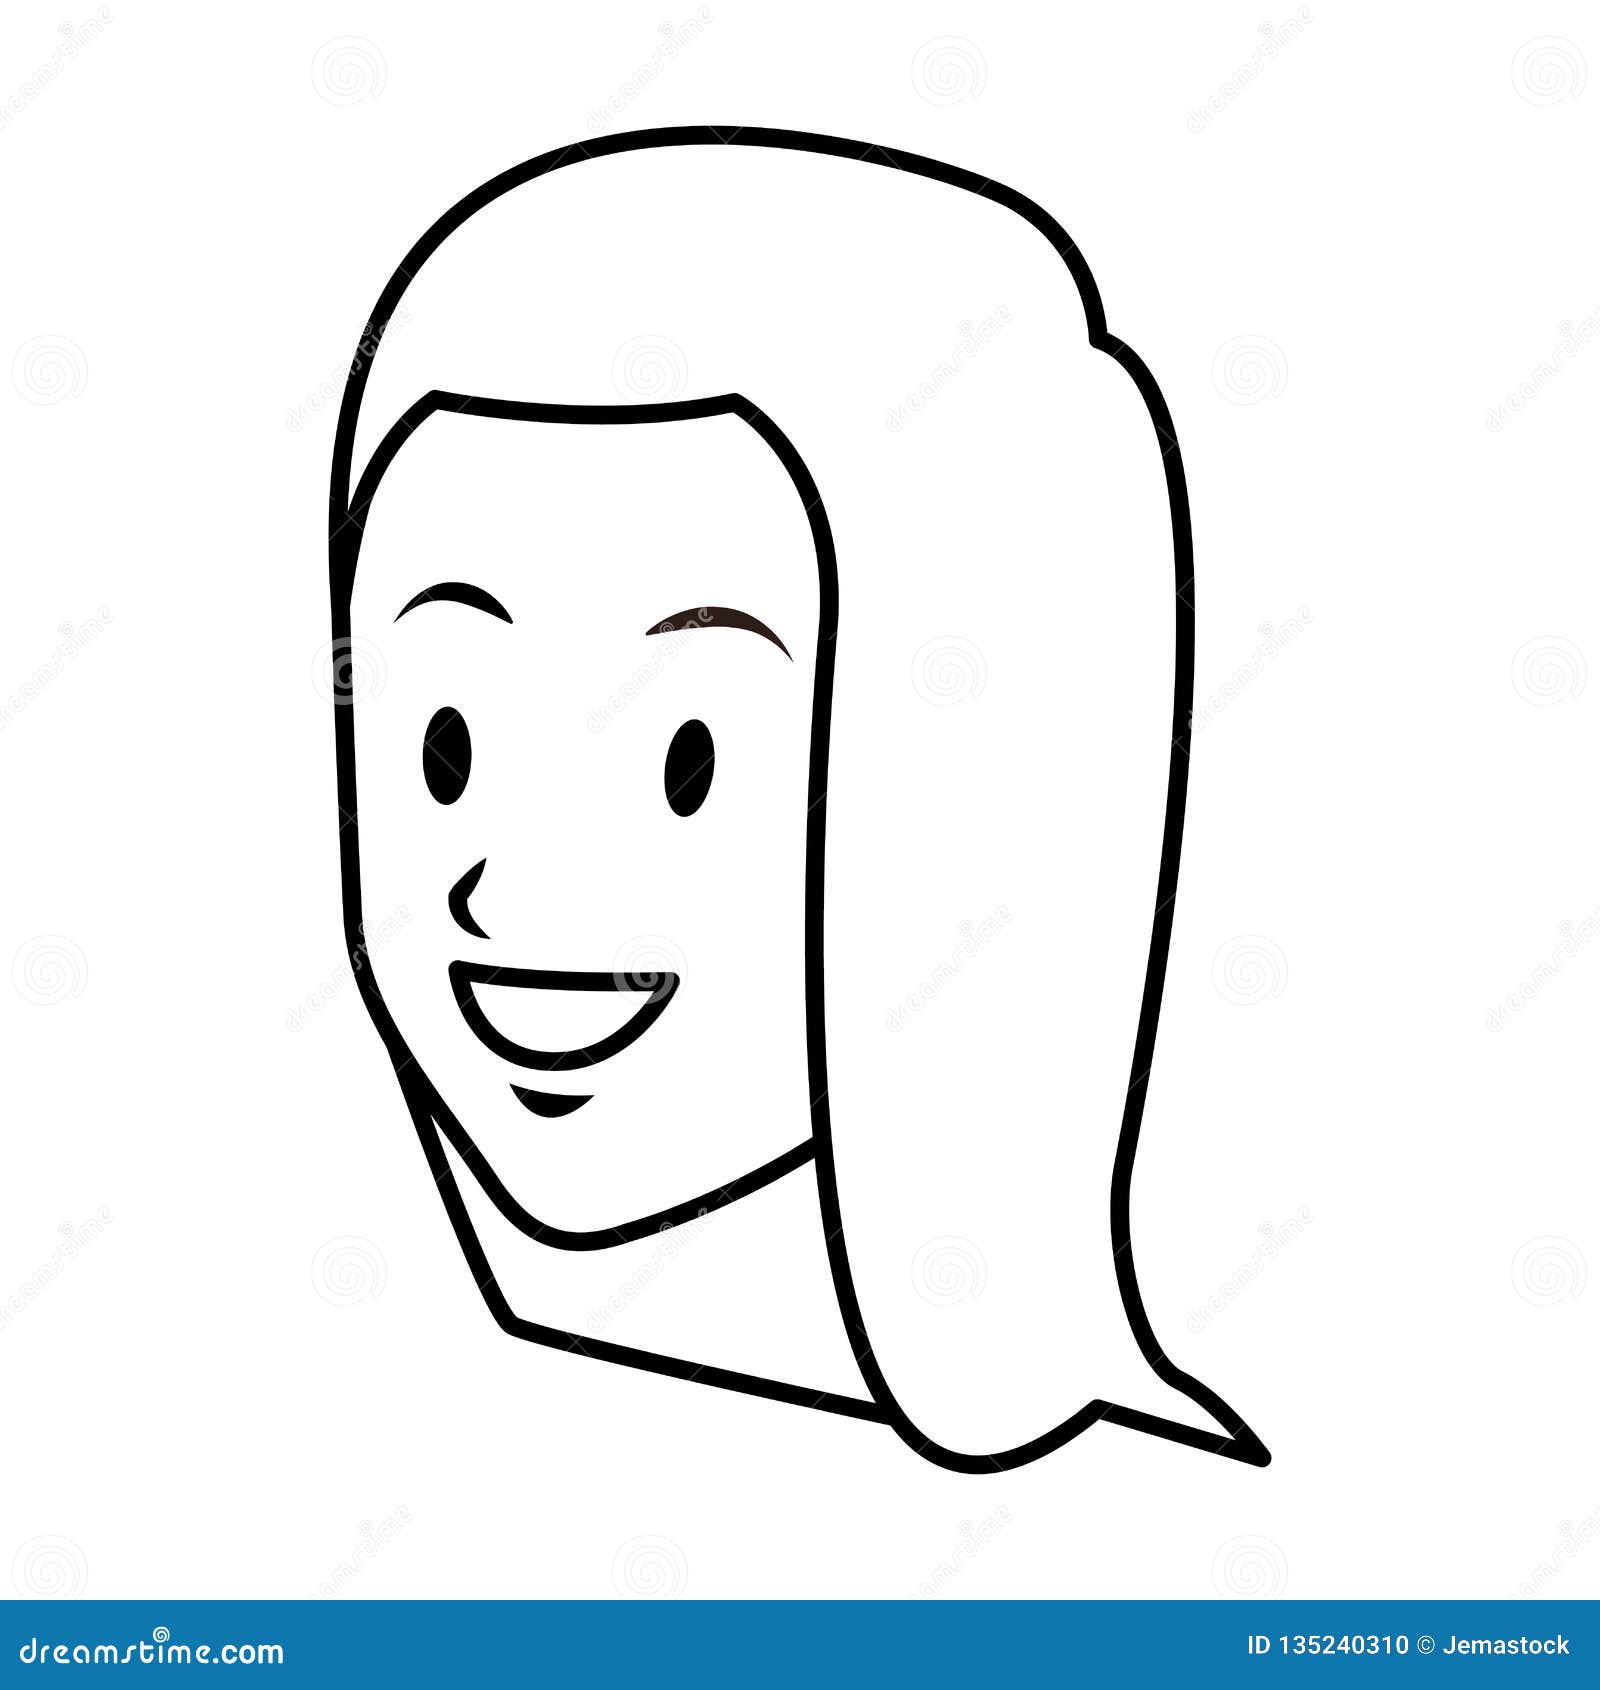 Woman Brunette Smiling only Face Black and White Stock Vector ...